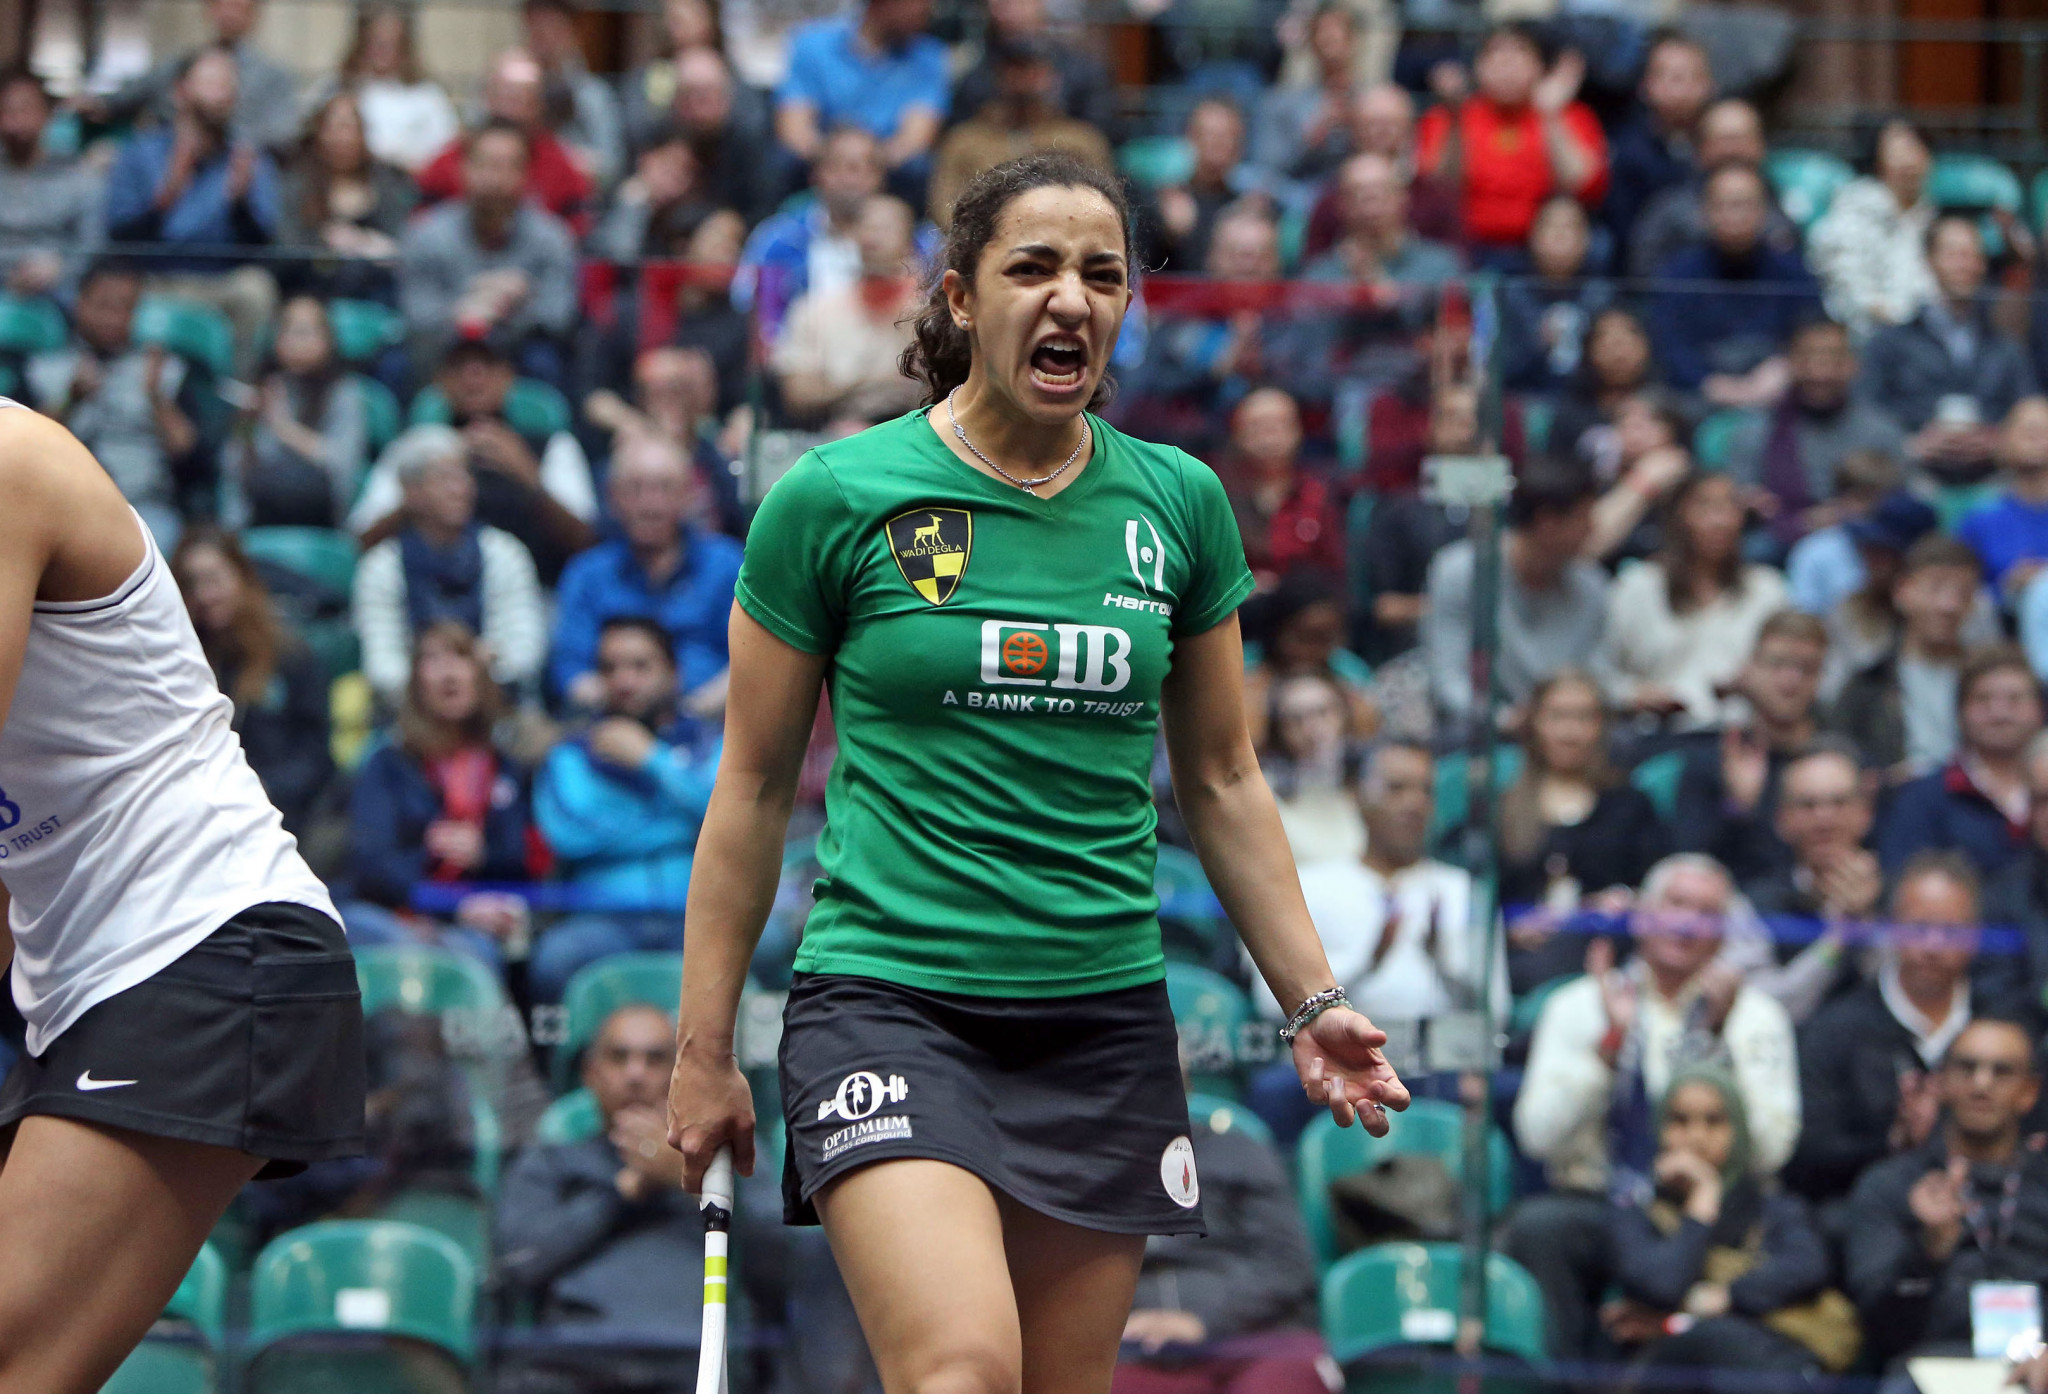 El Welily and Farag maintain world number one spots on PSA rankings